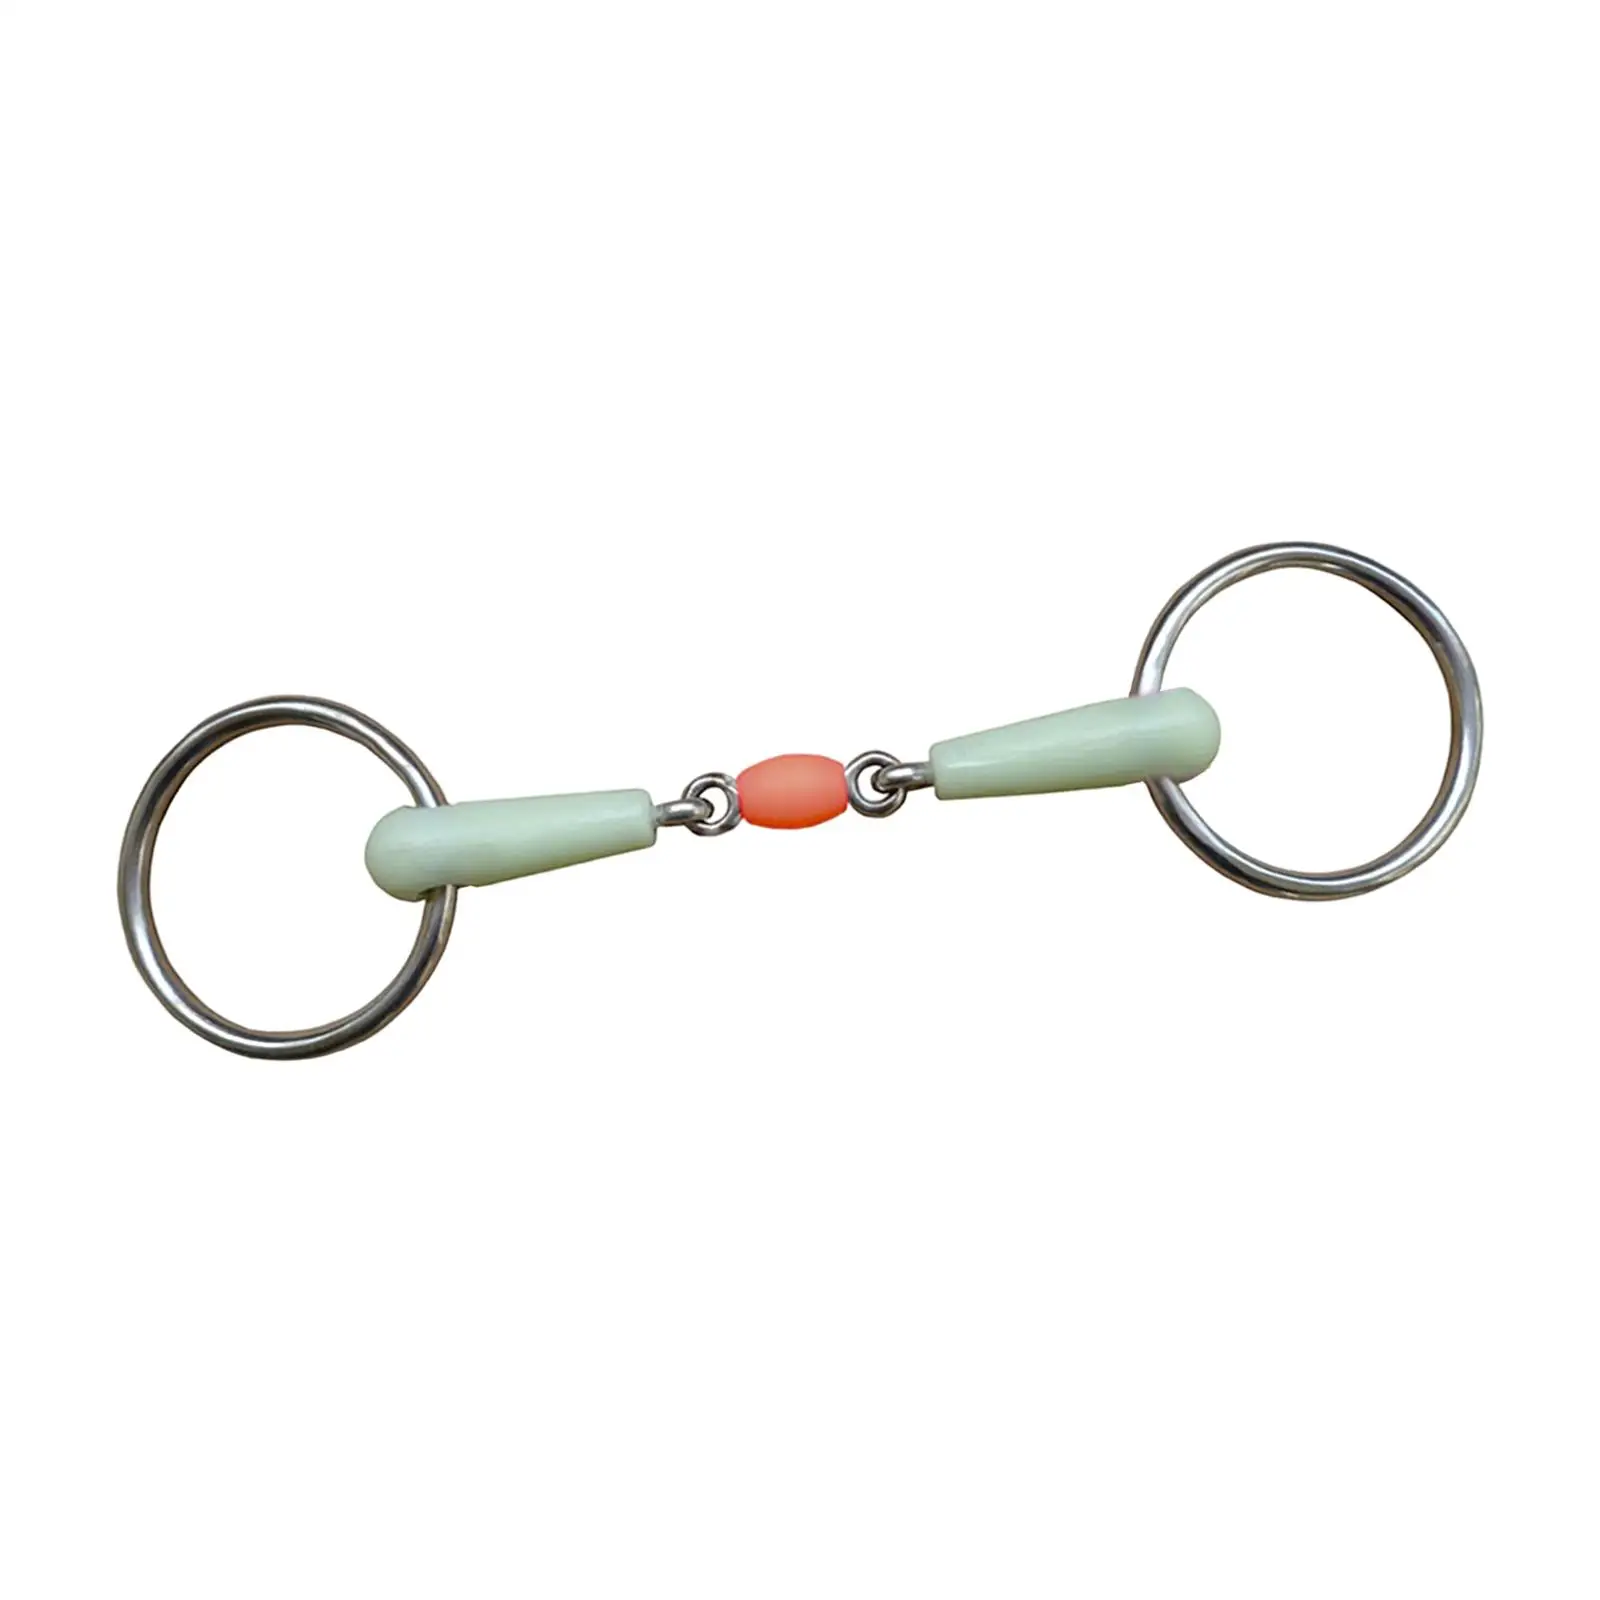 horse Mouth Bit Stainless Steel Snaffle Bits Jointed Mouth for Equipment Training Cheek